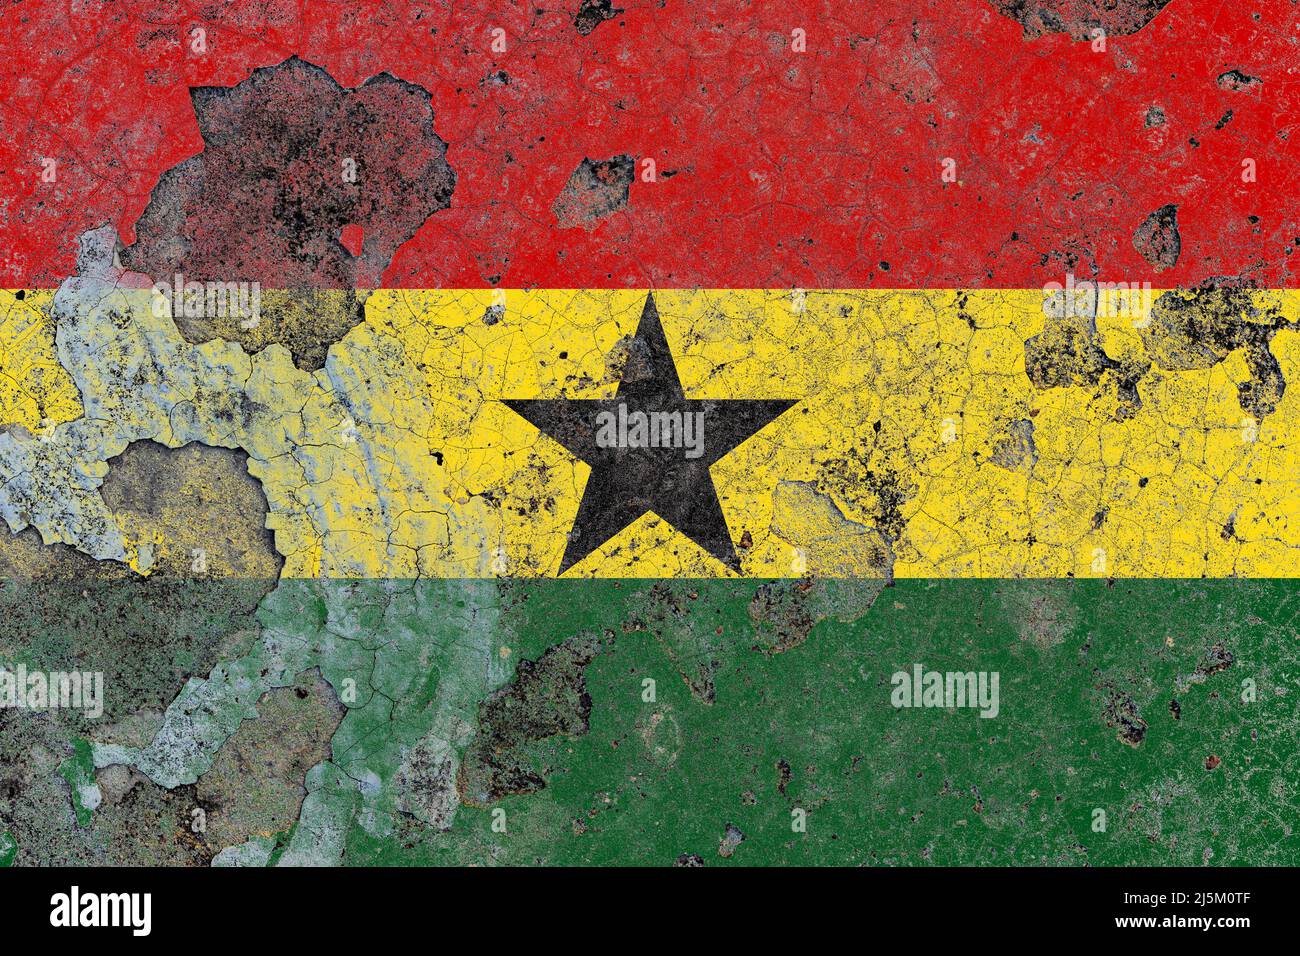 Ghana flag on a damaged old concrete wall surface Stock Photo